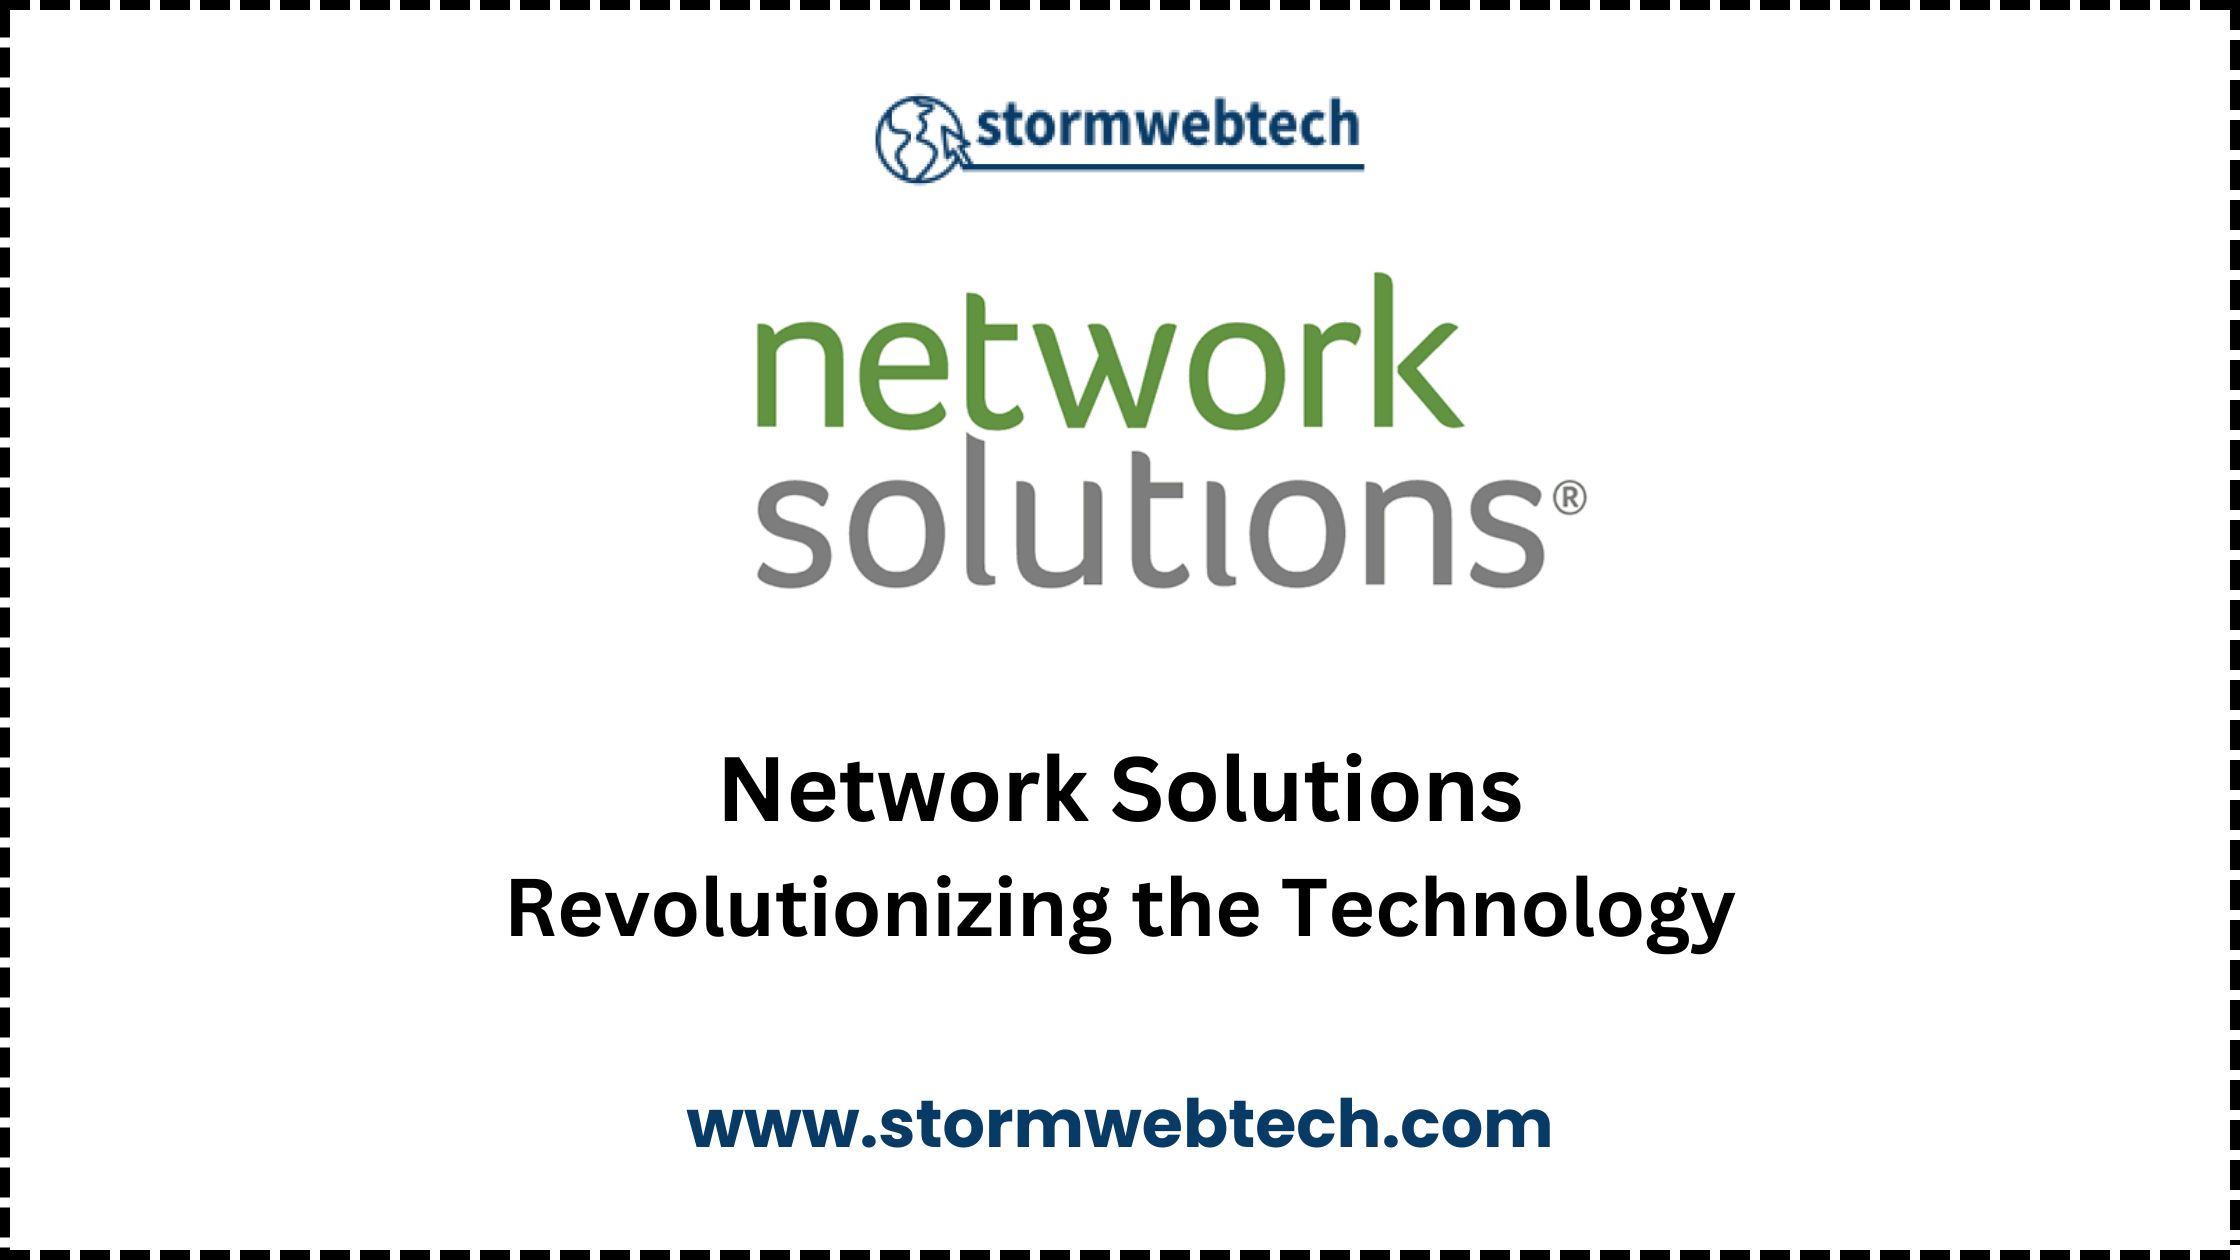 network solutions is an american technology company that has been a prominent player in the domain name registration and web services industry